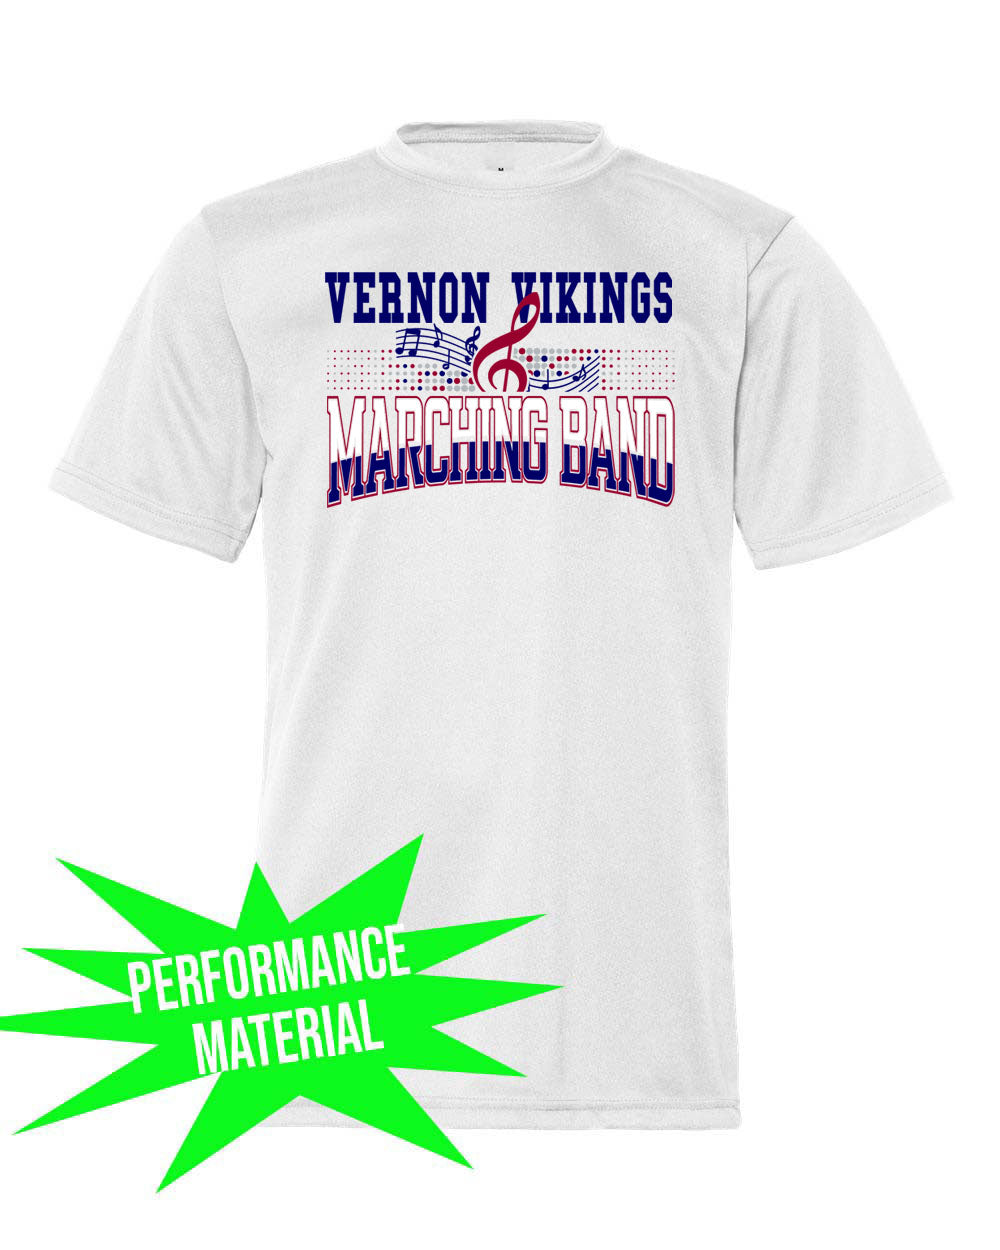 Vernon Marching Band Performance Material T-Shirt Design 6